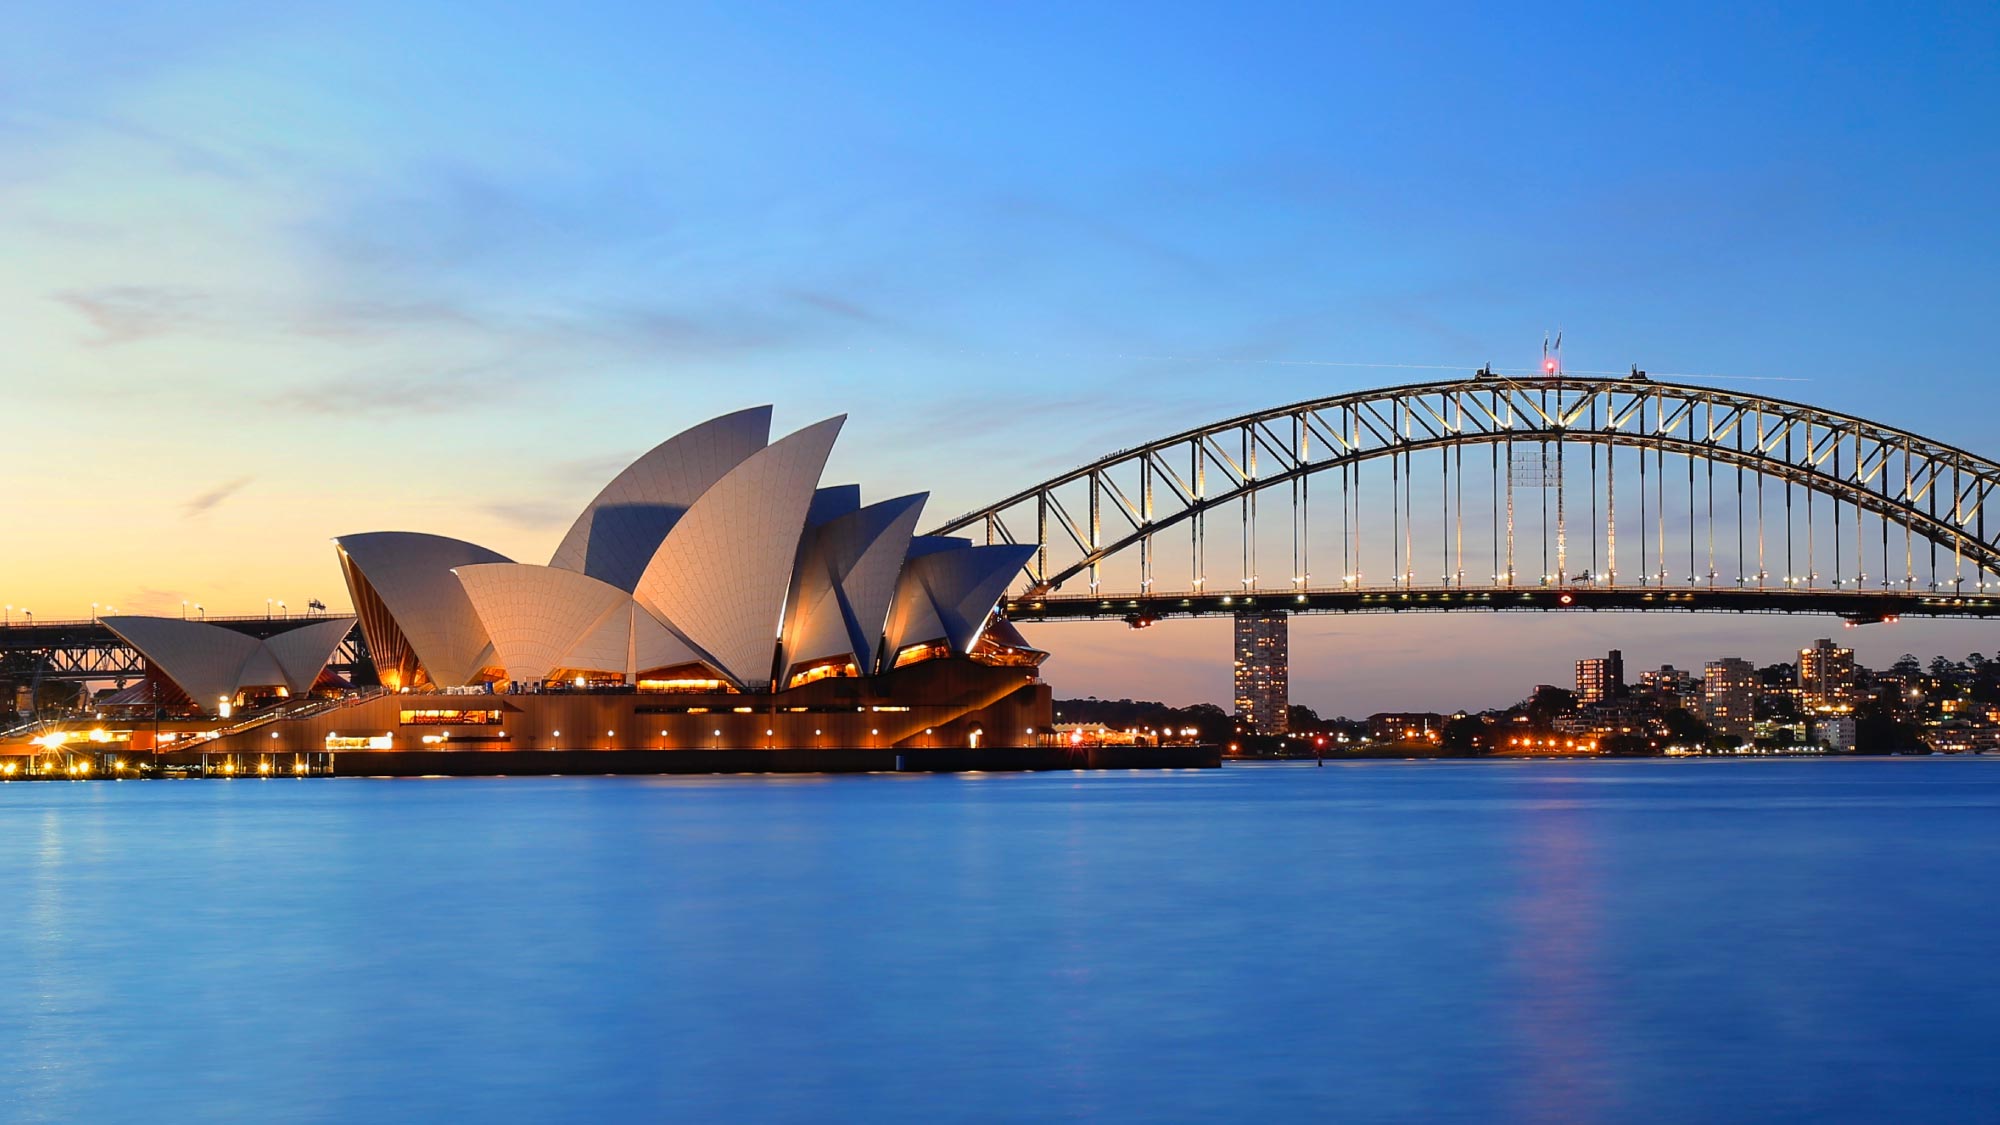 Experience the vibrant beauty of Sydney, Australia, a highlight of the journey spanning 21 countries for self-flying pilots. Explore iconic landmarks like the Sydney Harbour Bridge and Opera House, set against the backdrop of the Tasman Sea.